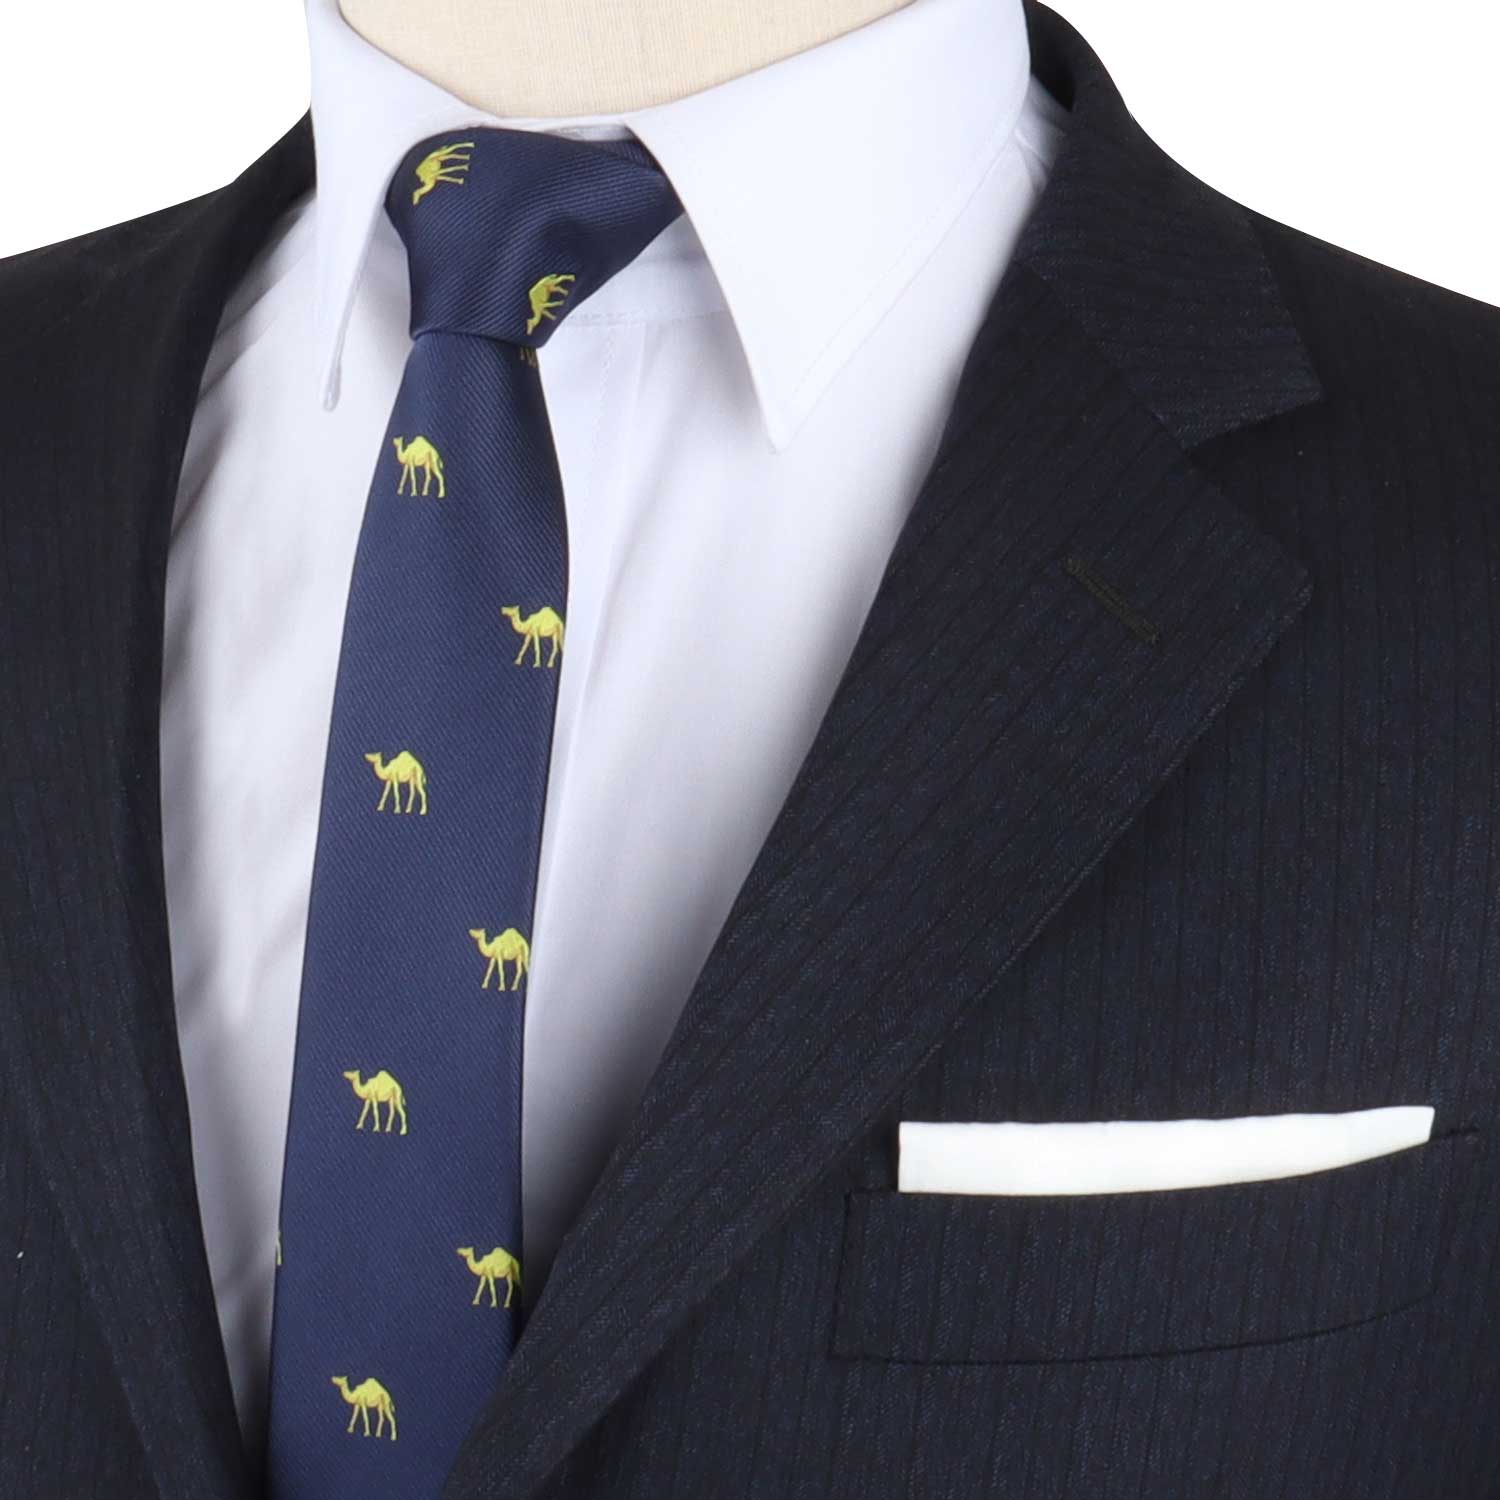 A mannequin wearing a blue suit with a Camel Skinny Tie charm.